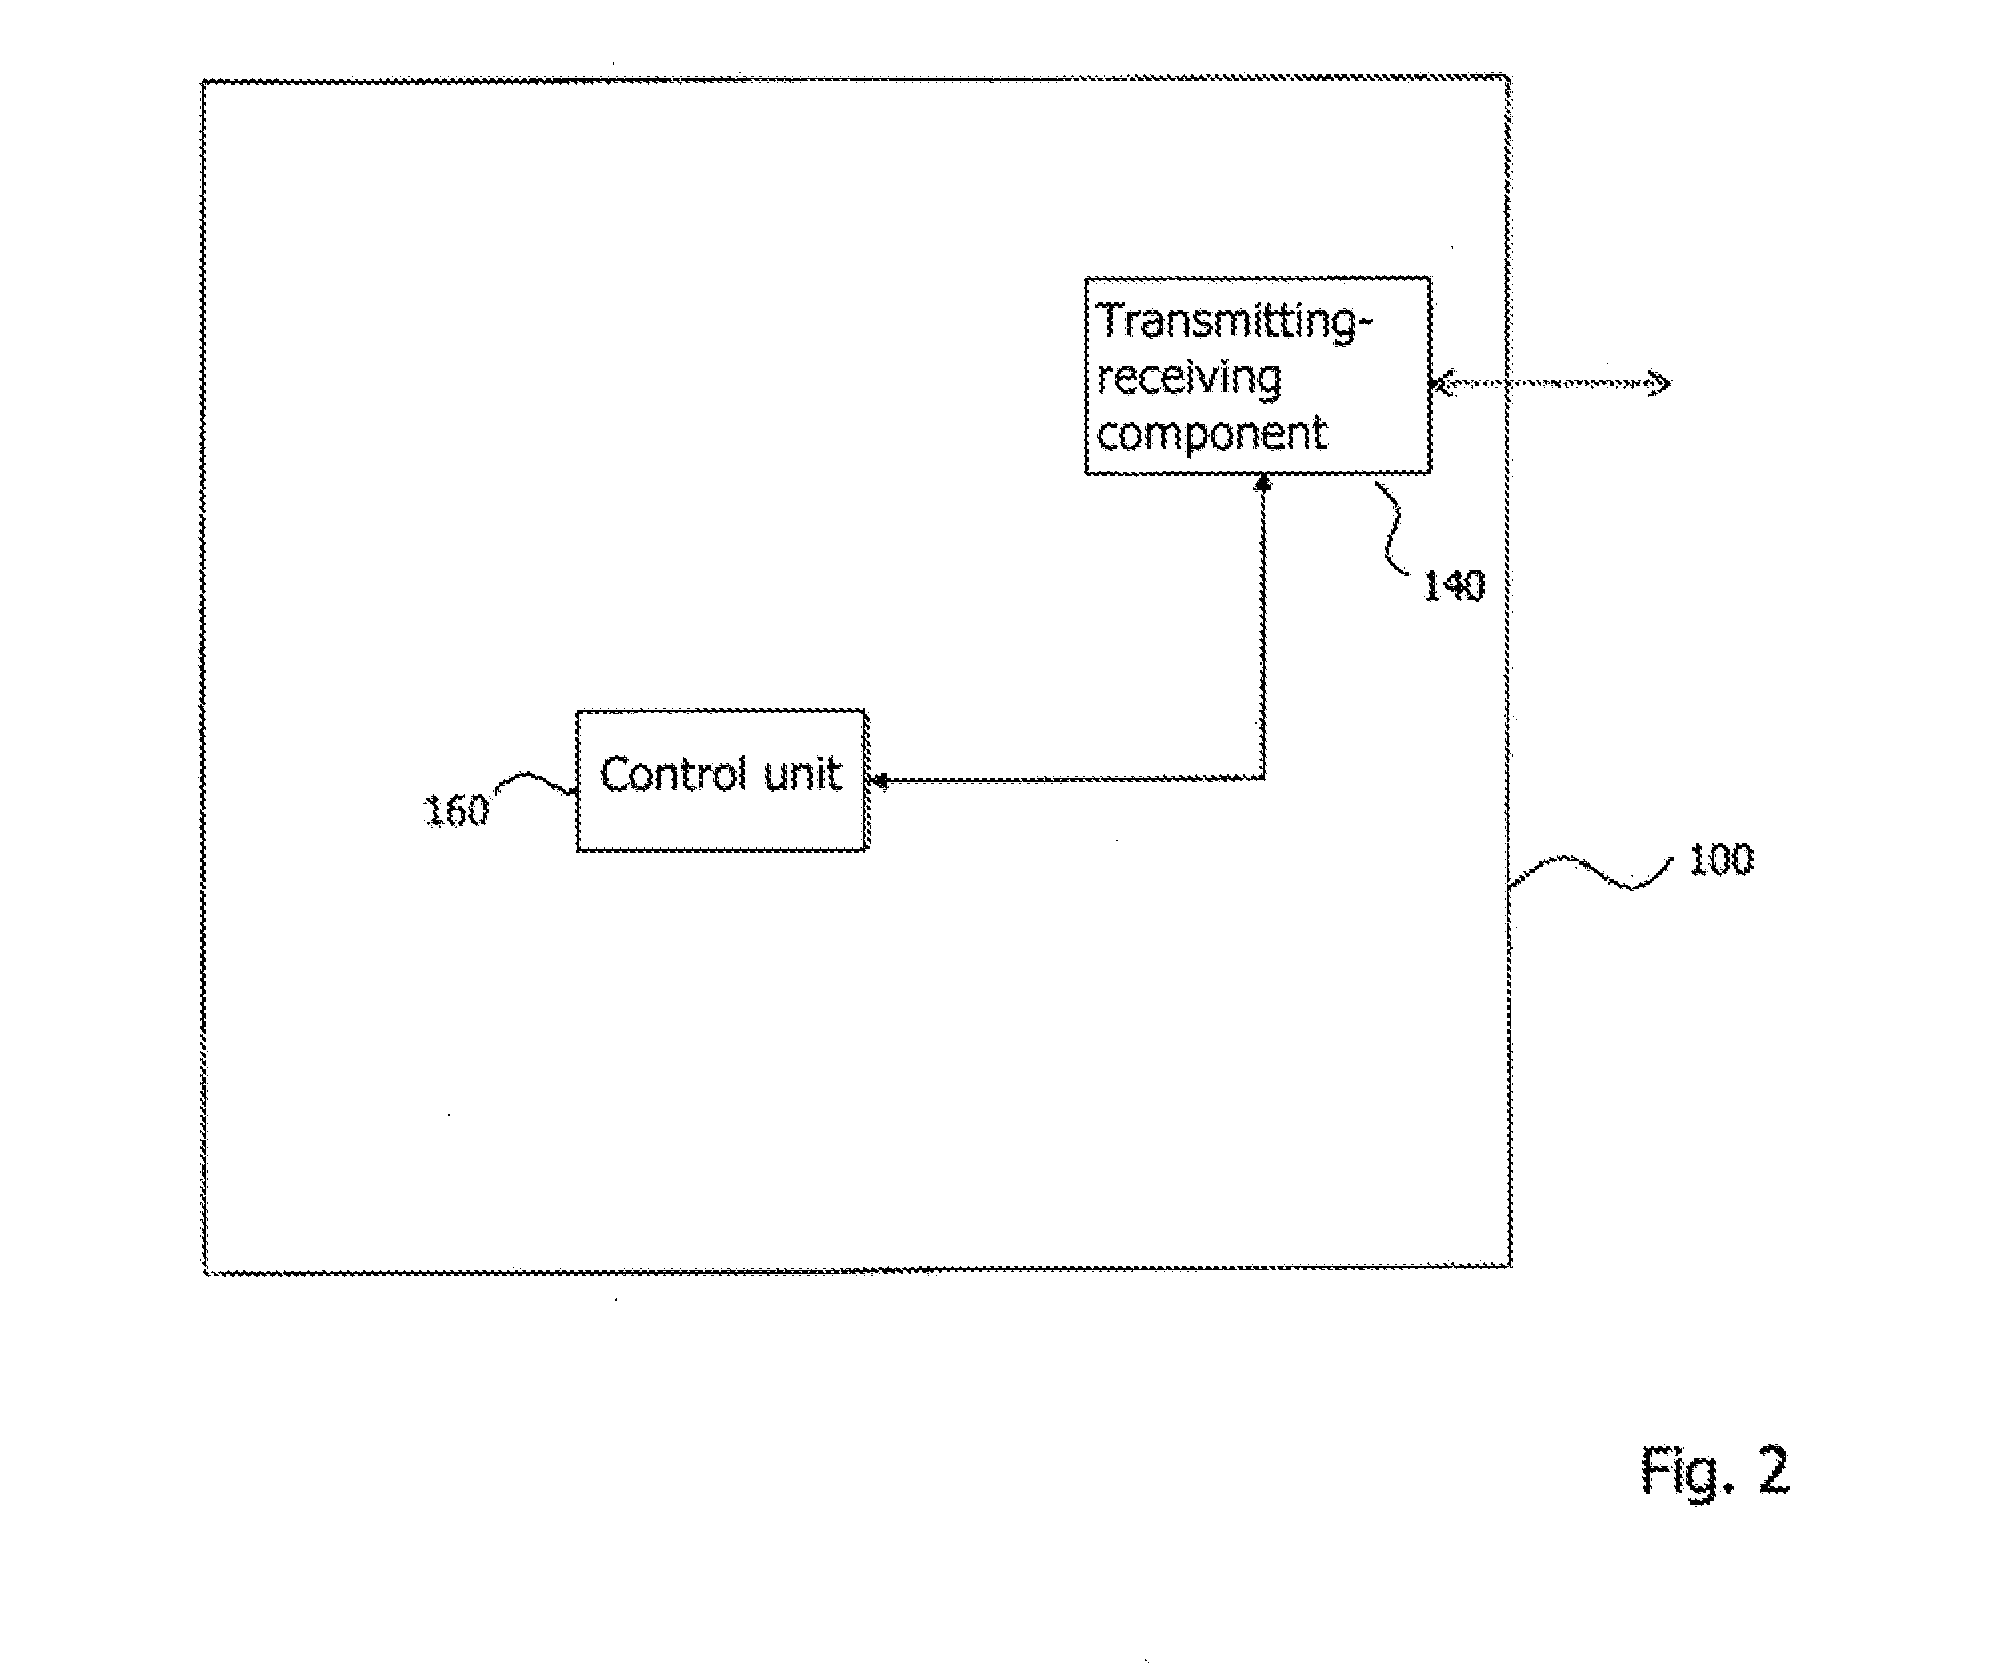 Method for considerably enhancing the availability of wireless connections